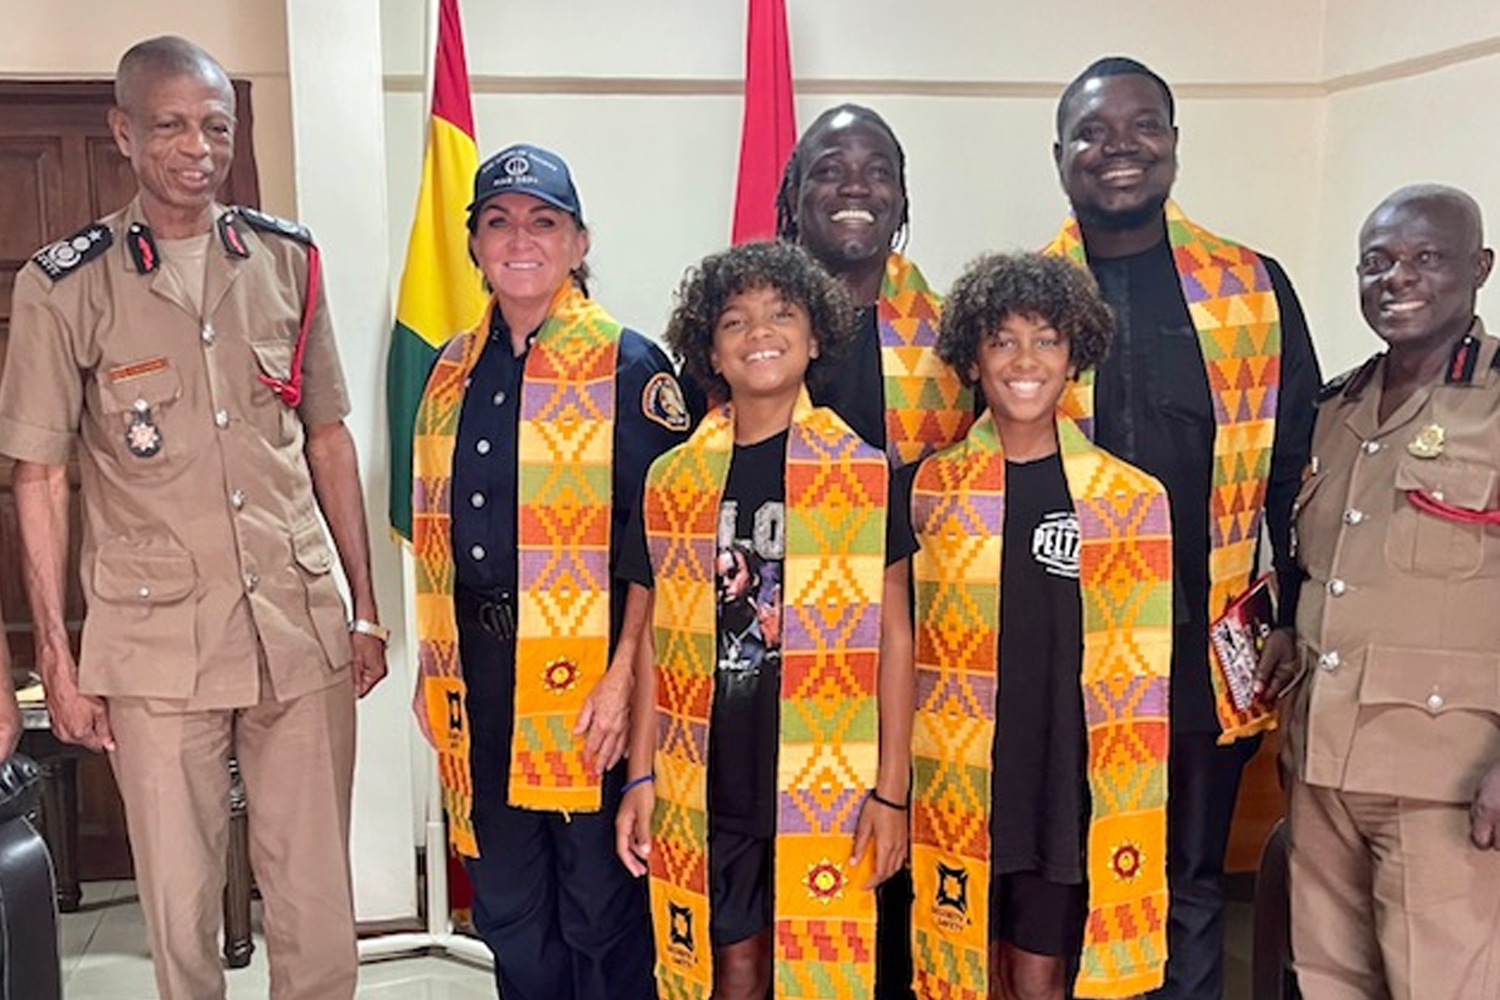 While on vacation with her family, Captain Sheila Kelliher from the Public Information Office met with the Chief of the Ghana National Fire Service.